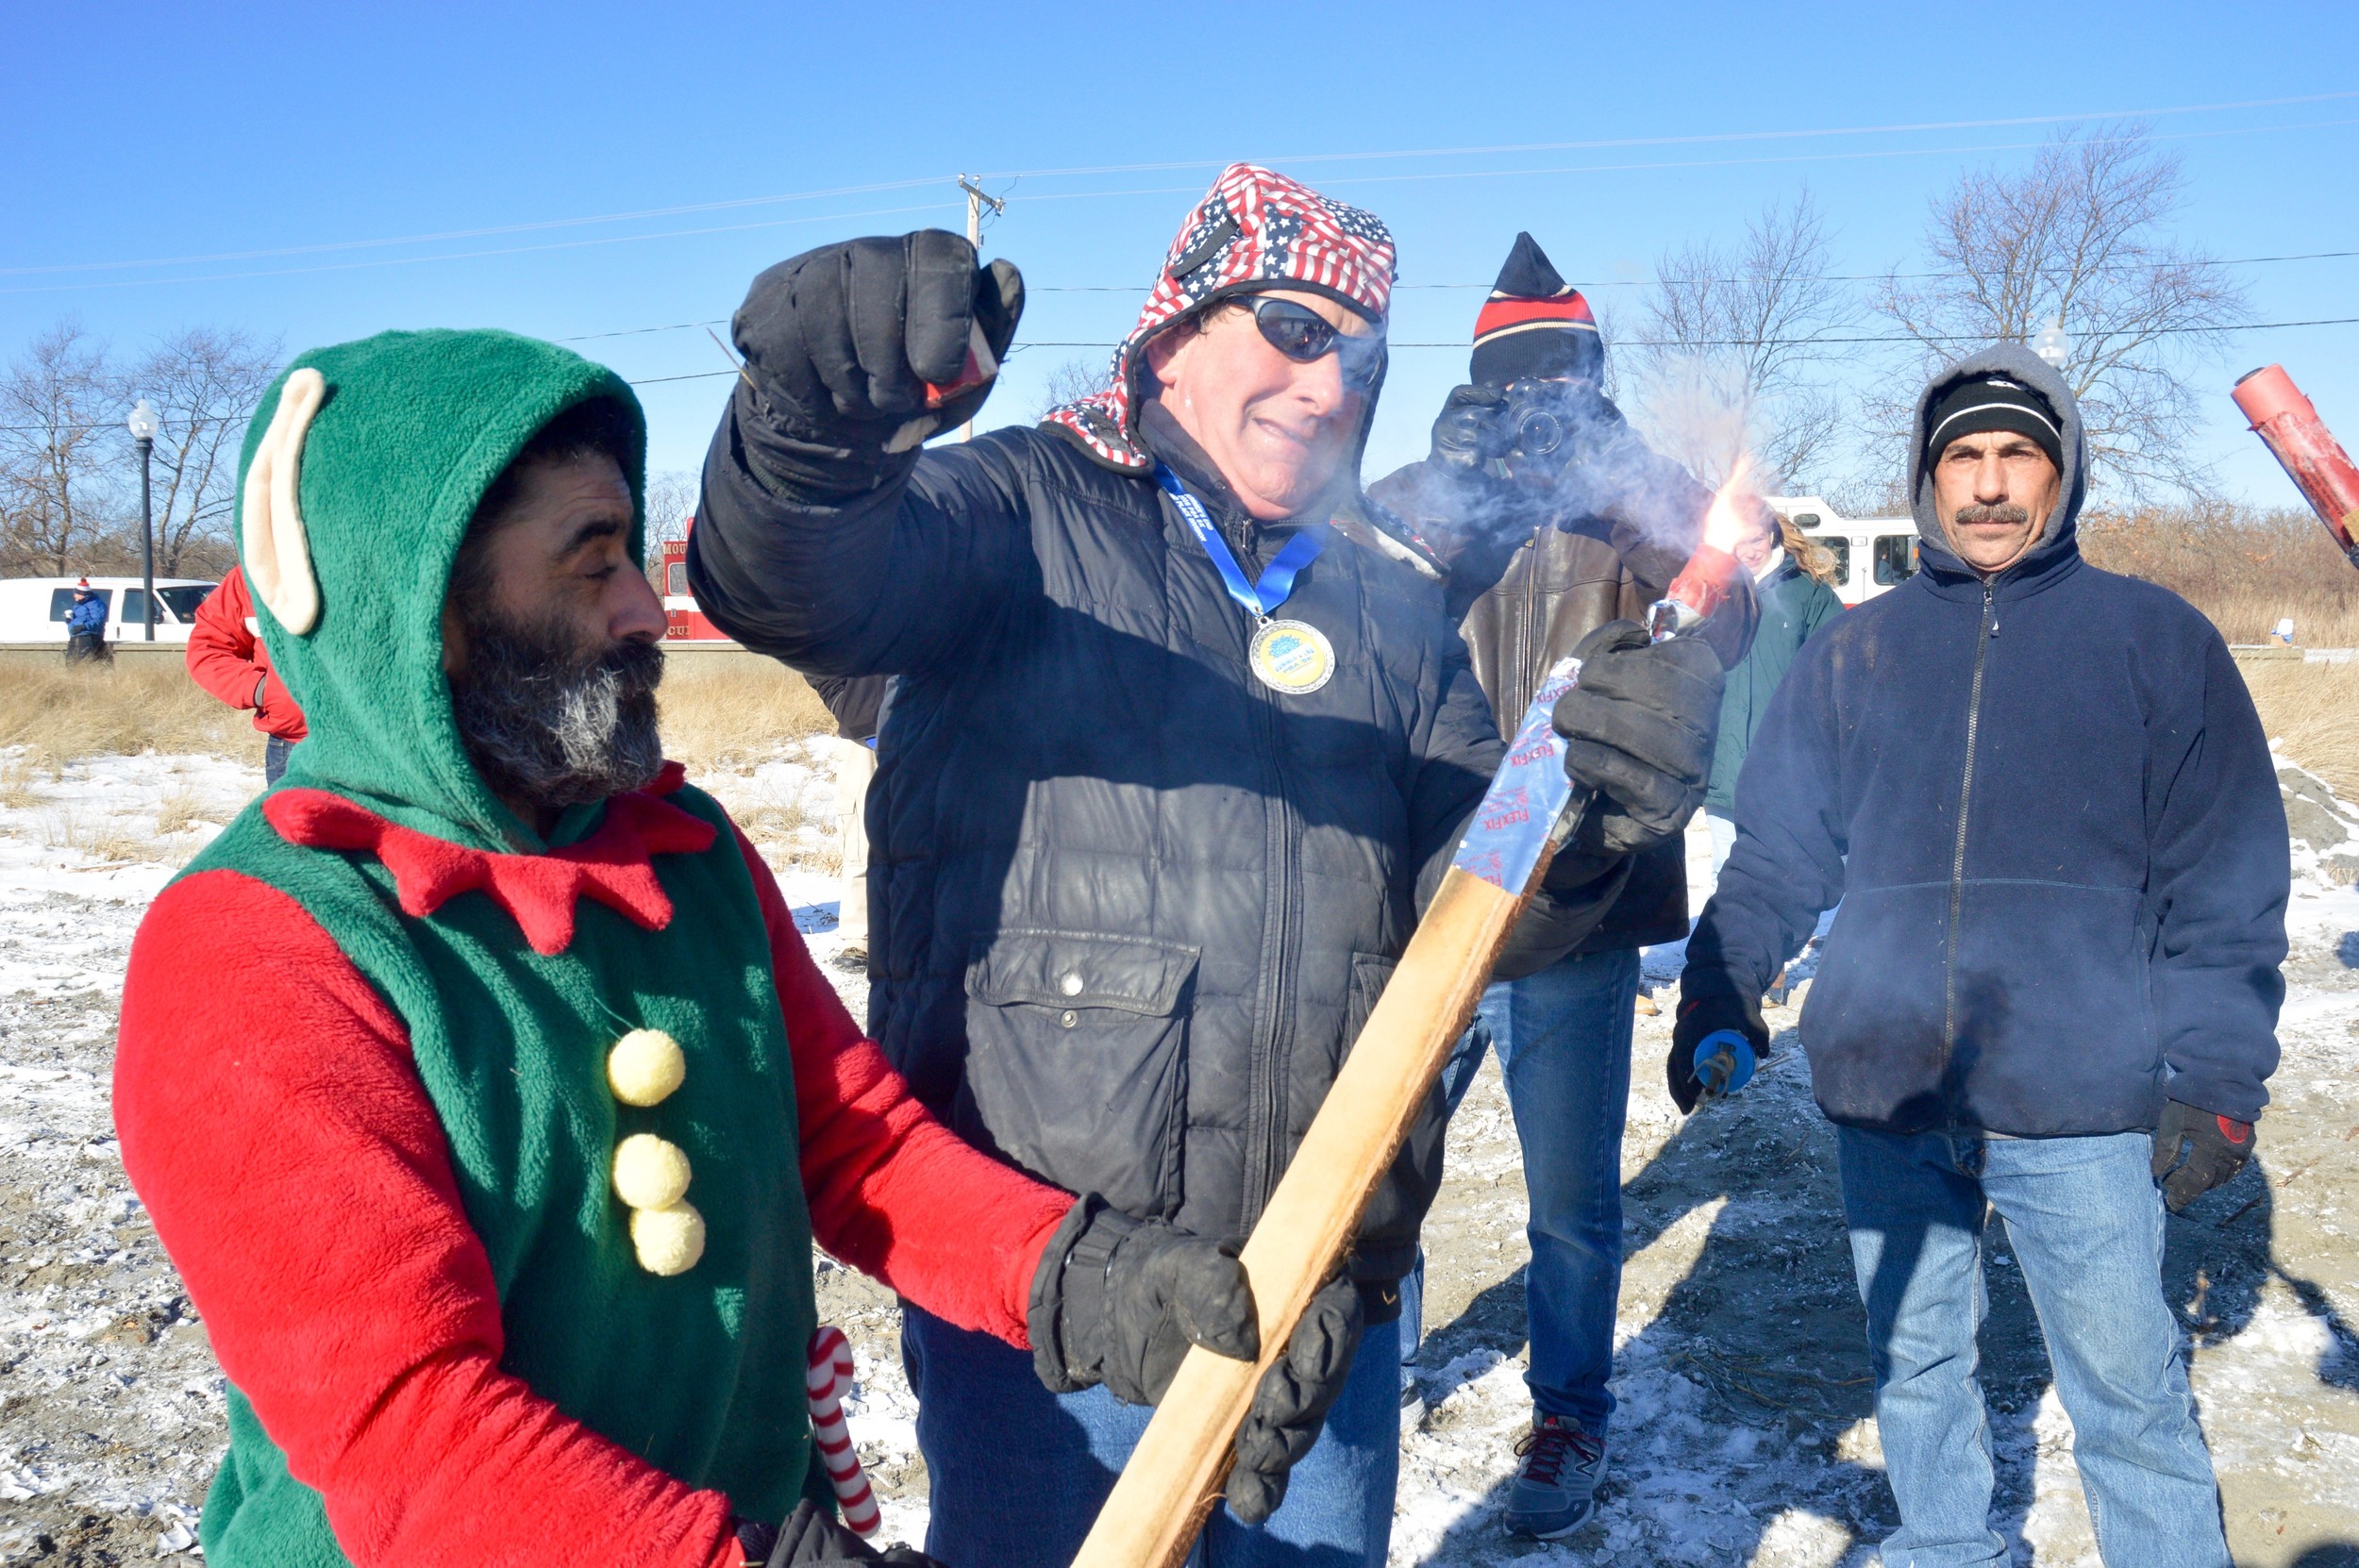 John Vitkevich (center), lights a torch for Chris Freitas (left) to be used for igniting the bonfire.